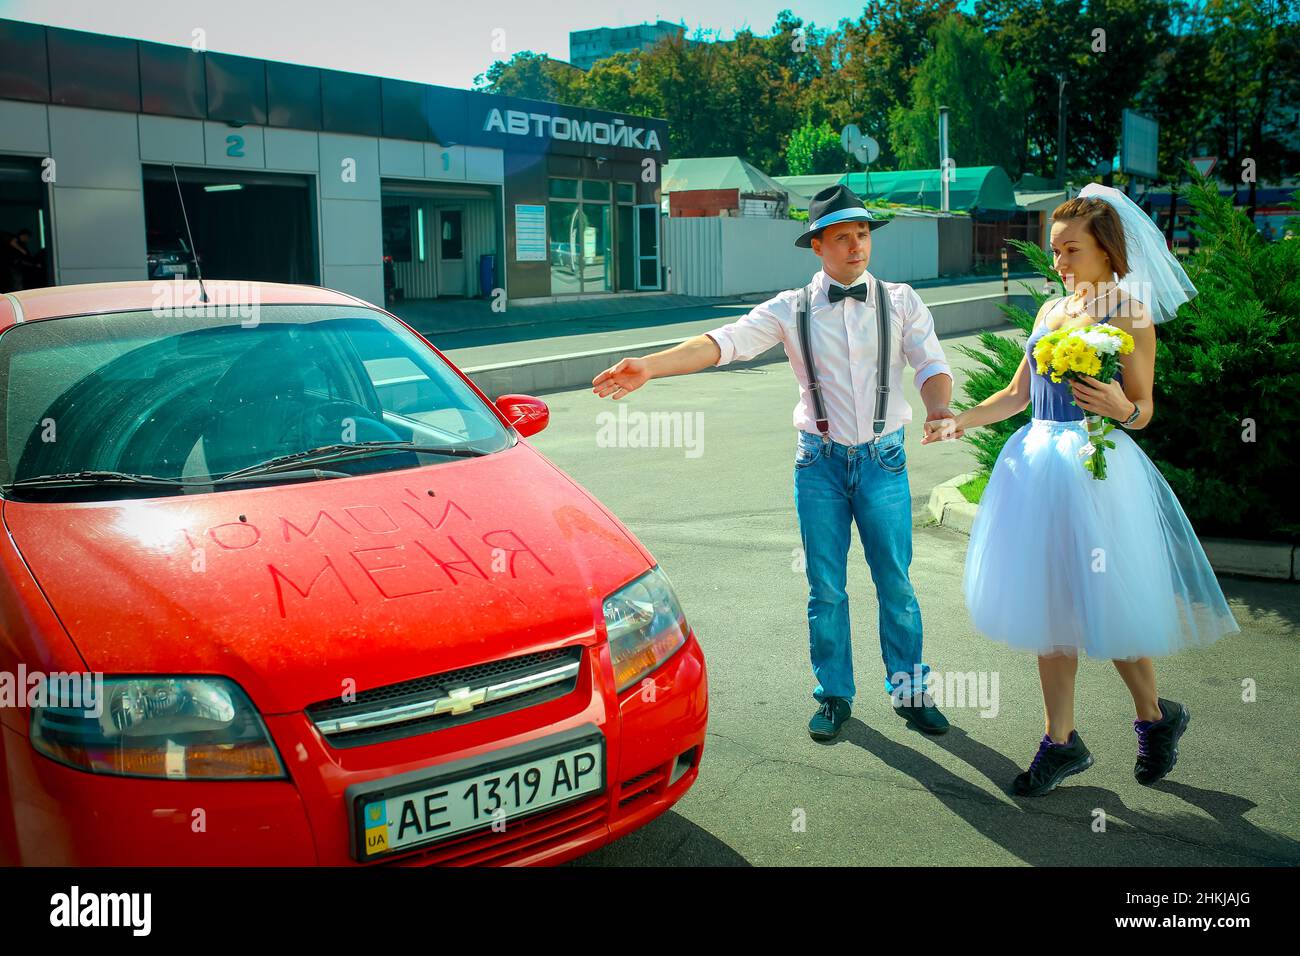 Dnepropetrovsk, Ukraine - 09.11.2016: A young man in a hat and a woman with a bouquet of flowers near the car. On the hood in Russian is written 'wash Stock Photo